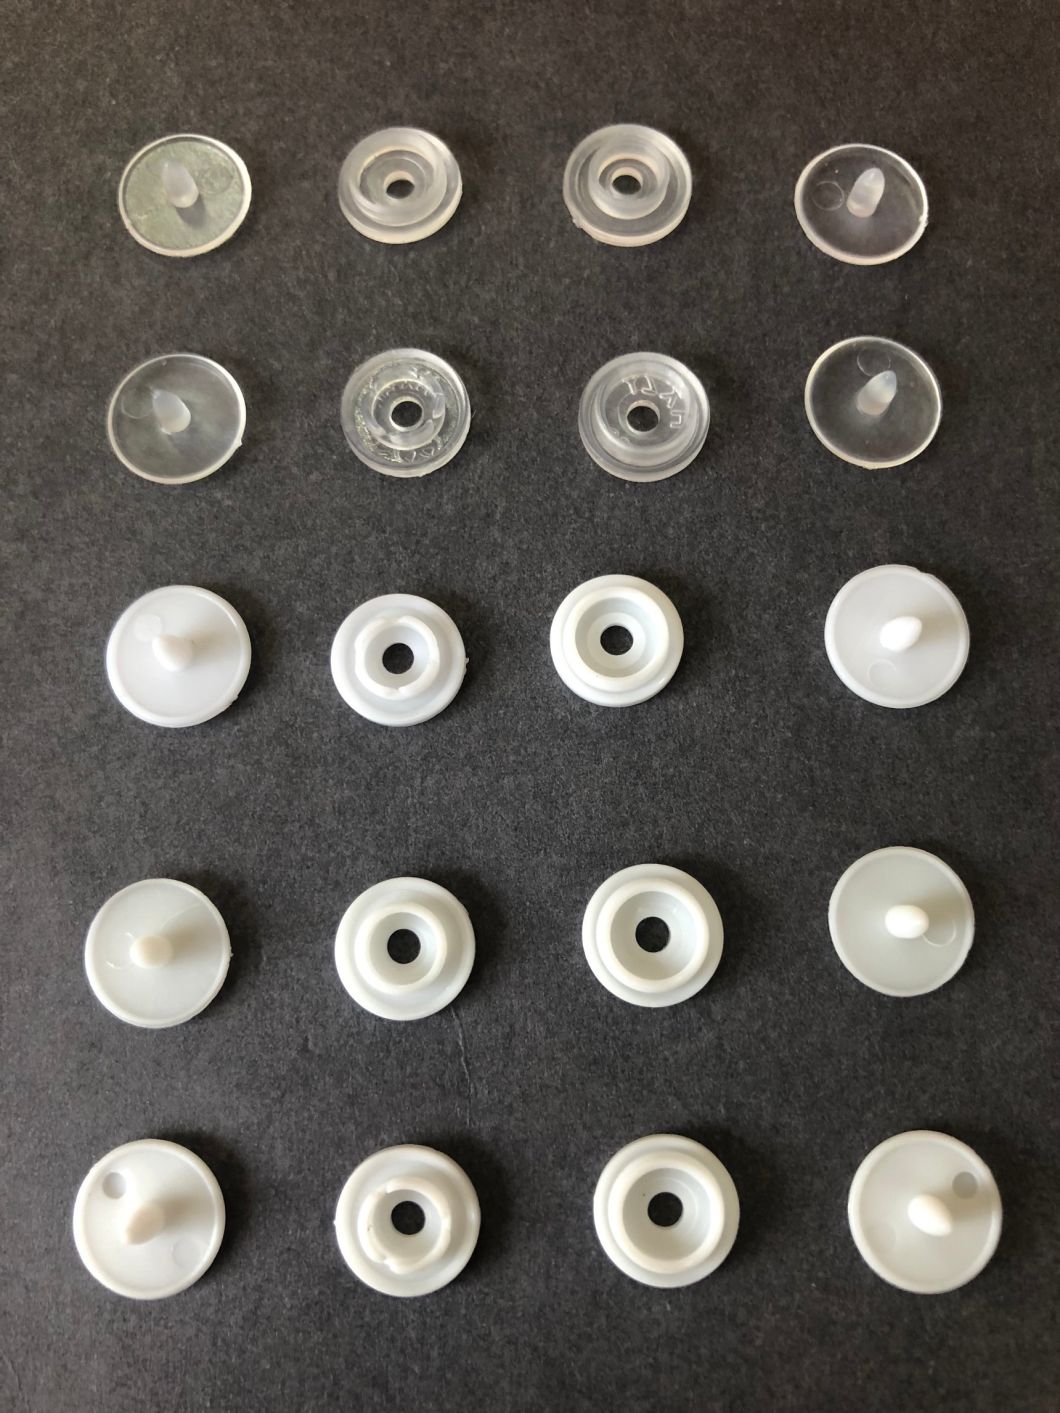 POM and PP White and Colorful Plastic Snap Button Fasteners Press Stud Poppers T3/T5/T8 Buttons